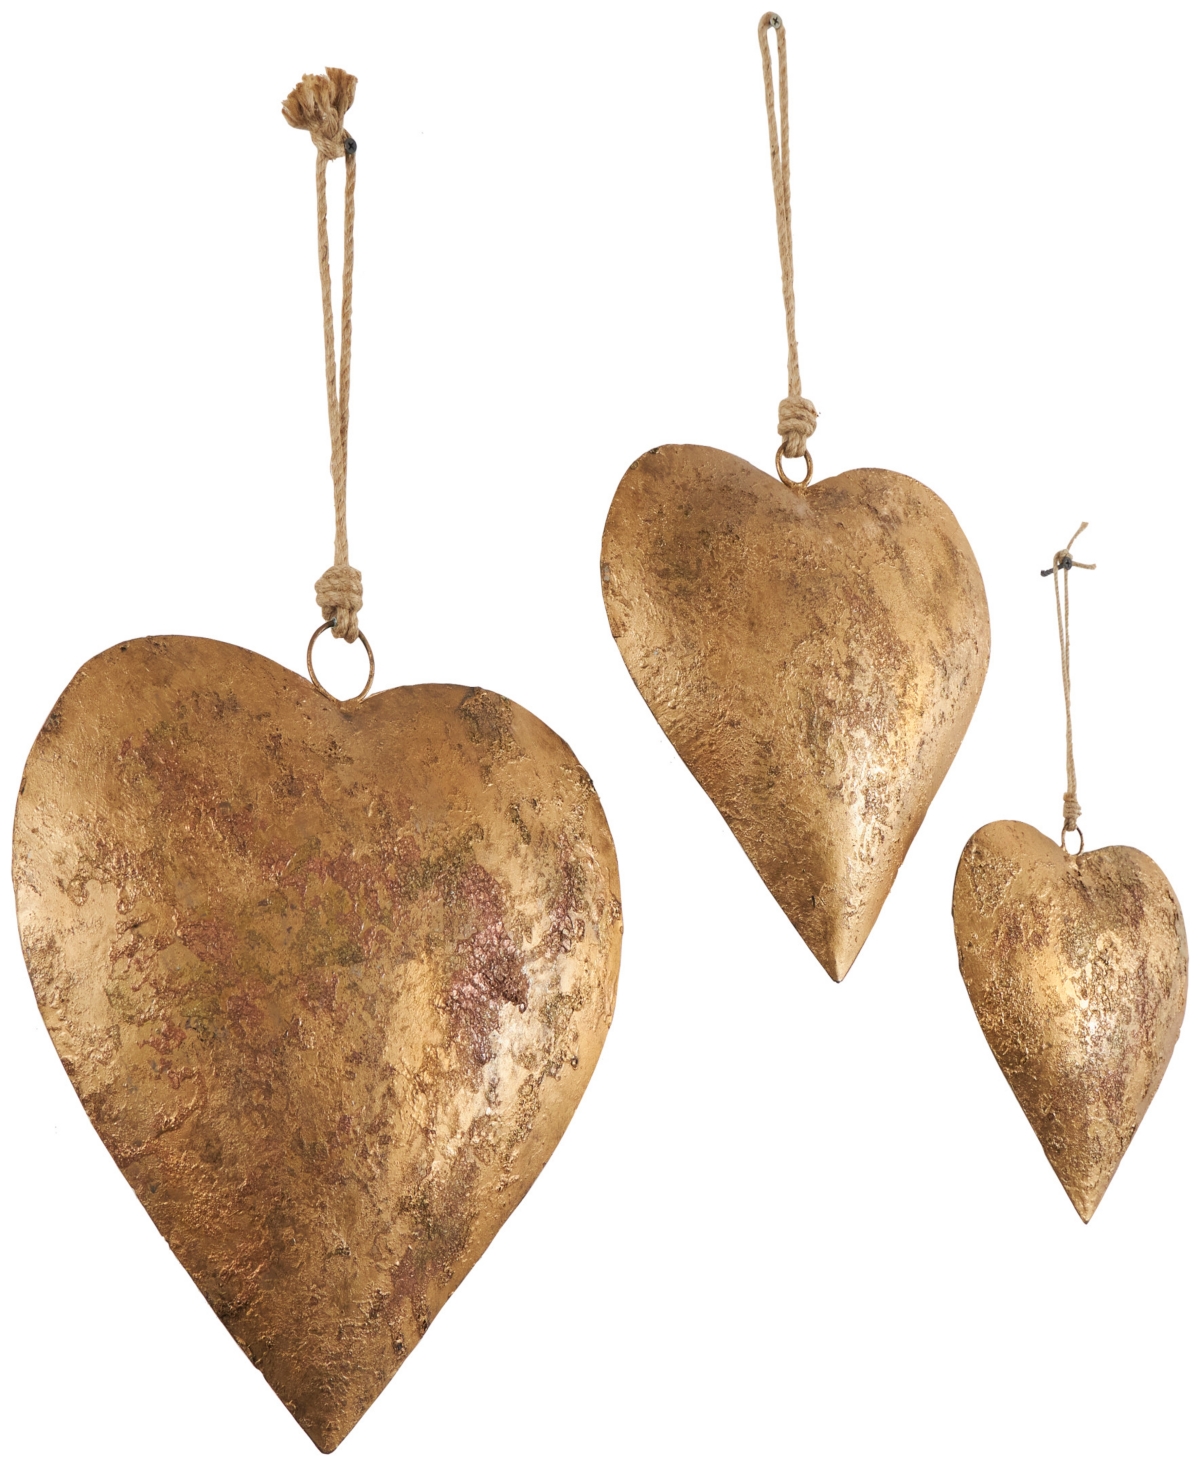 Shop Rosemary Lane Metal Heart Decorative Bells With Hanging Rope Set Of 3, 20", 17", 12" In Gold